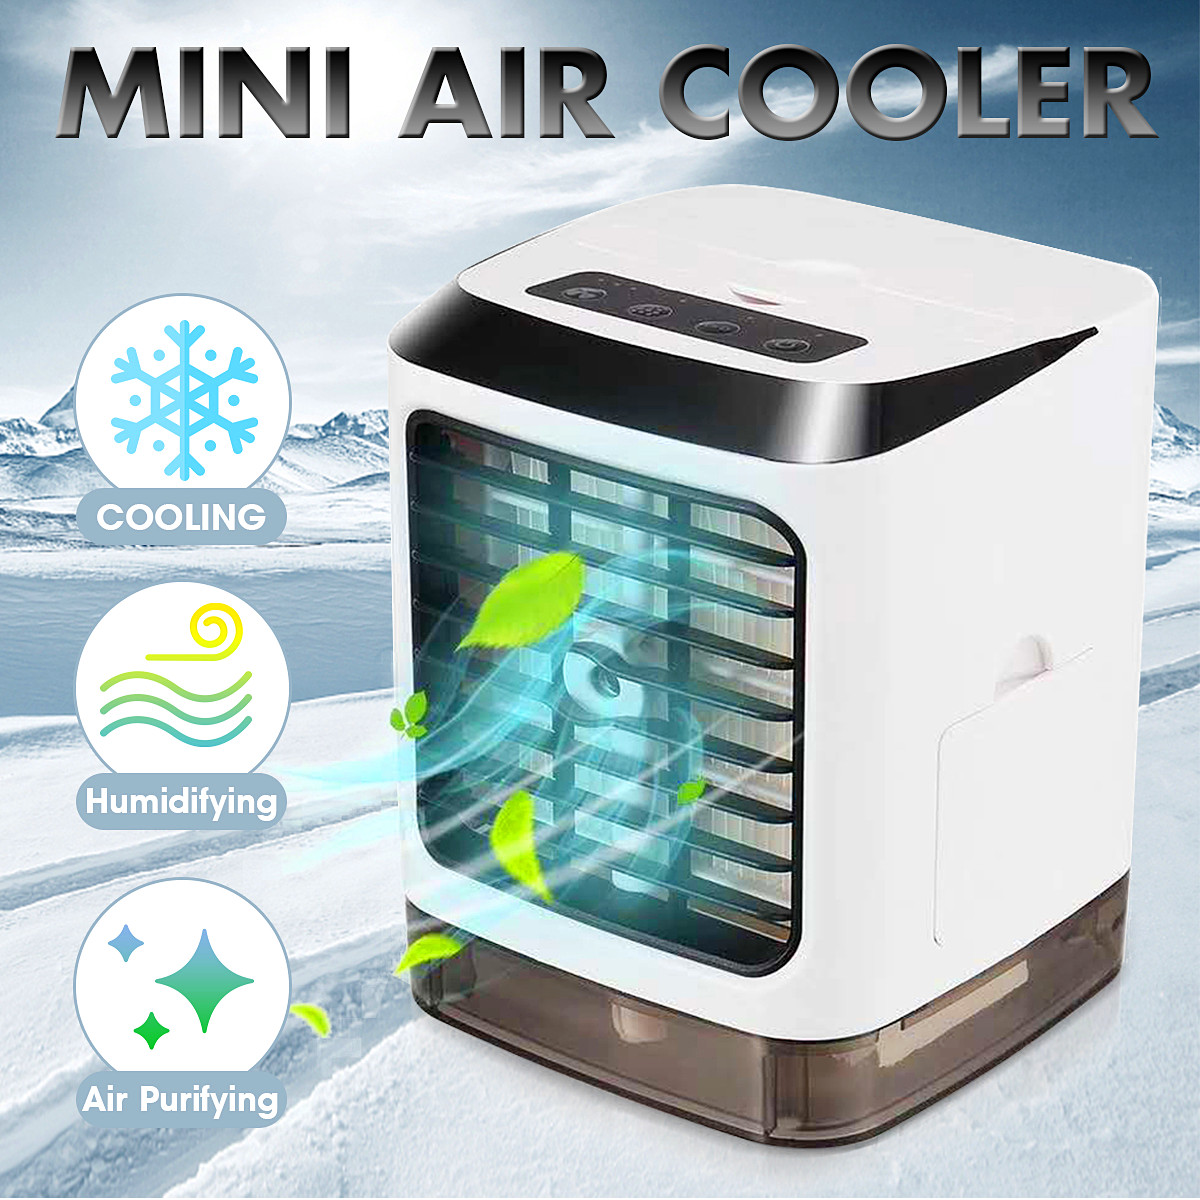 LED-480mL-Personal-Evaporative-Air-Cooler-Humidifier-Portable-Air-Conditioner-Mist-Prayer-USB-Cooler-1479420-4